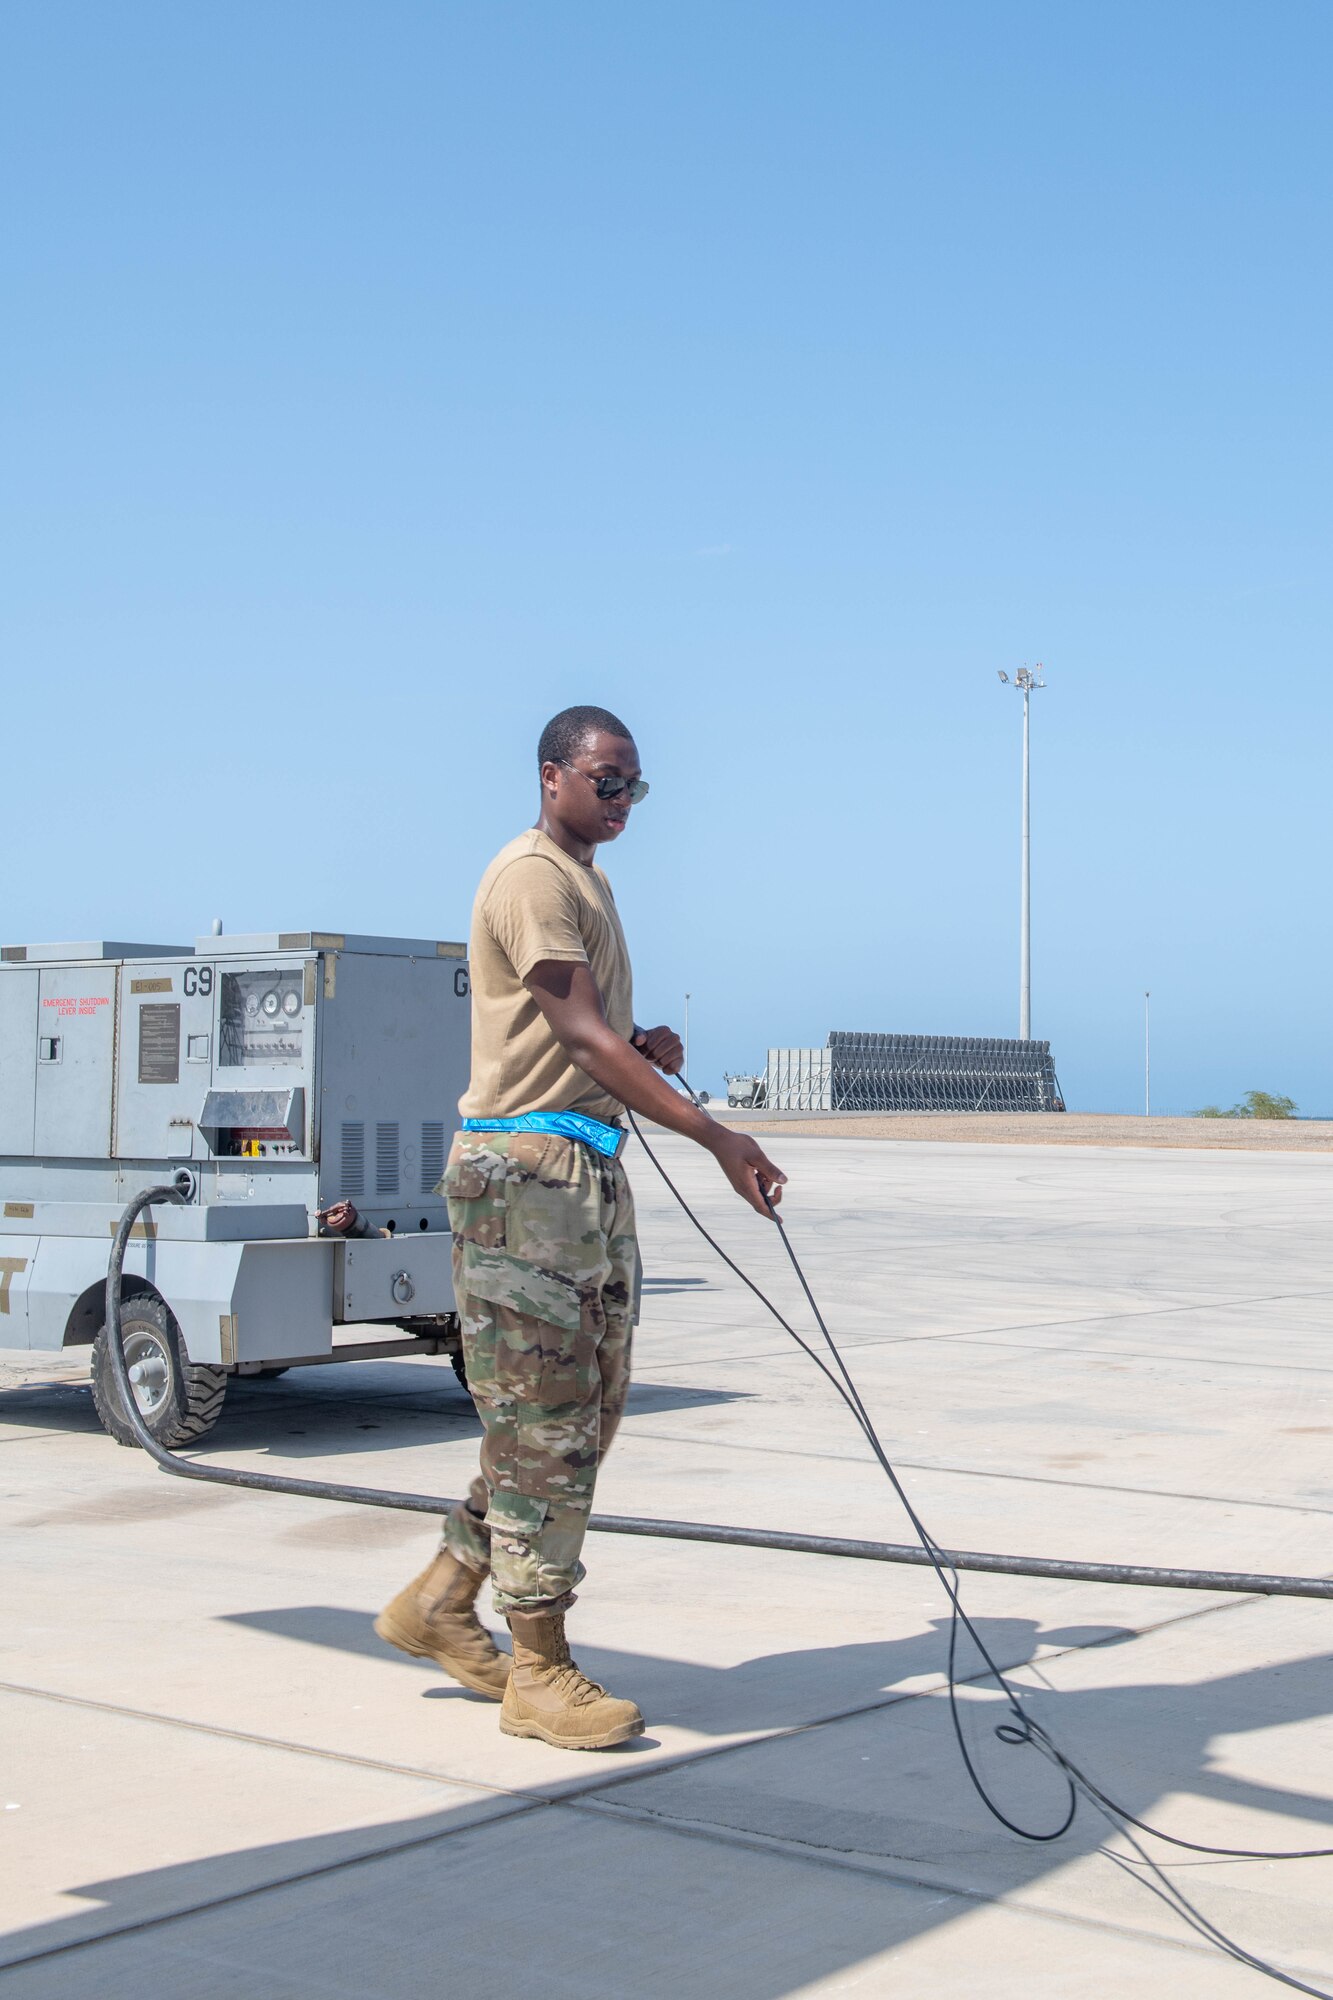 U.S. Air Force Reserve Senior Airman Justin Young, an Airman from Youngstown, Ohio, currently deployed to Camp Lemonnier, Djibouti, with the 75th Expeditionary Airlift Squadron "Rogue Squadron", conducts maintenance on a C-130 Hercules assigned to the squadron, May 3, 2022.